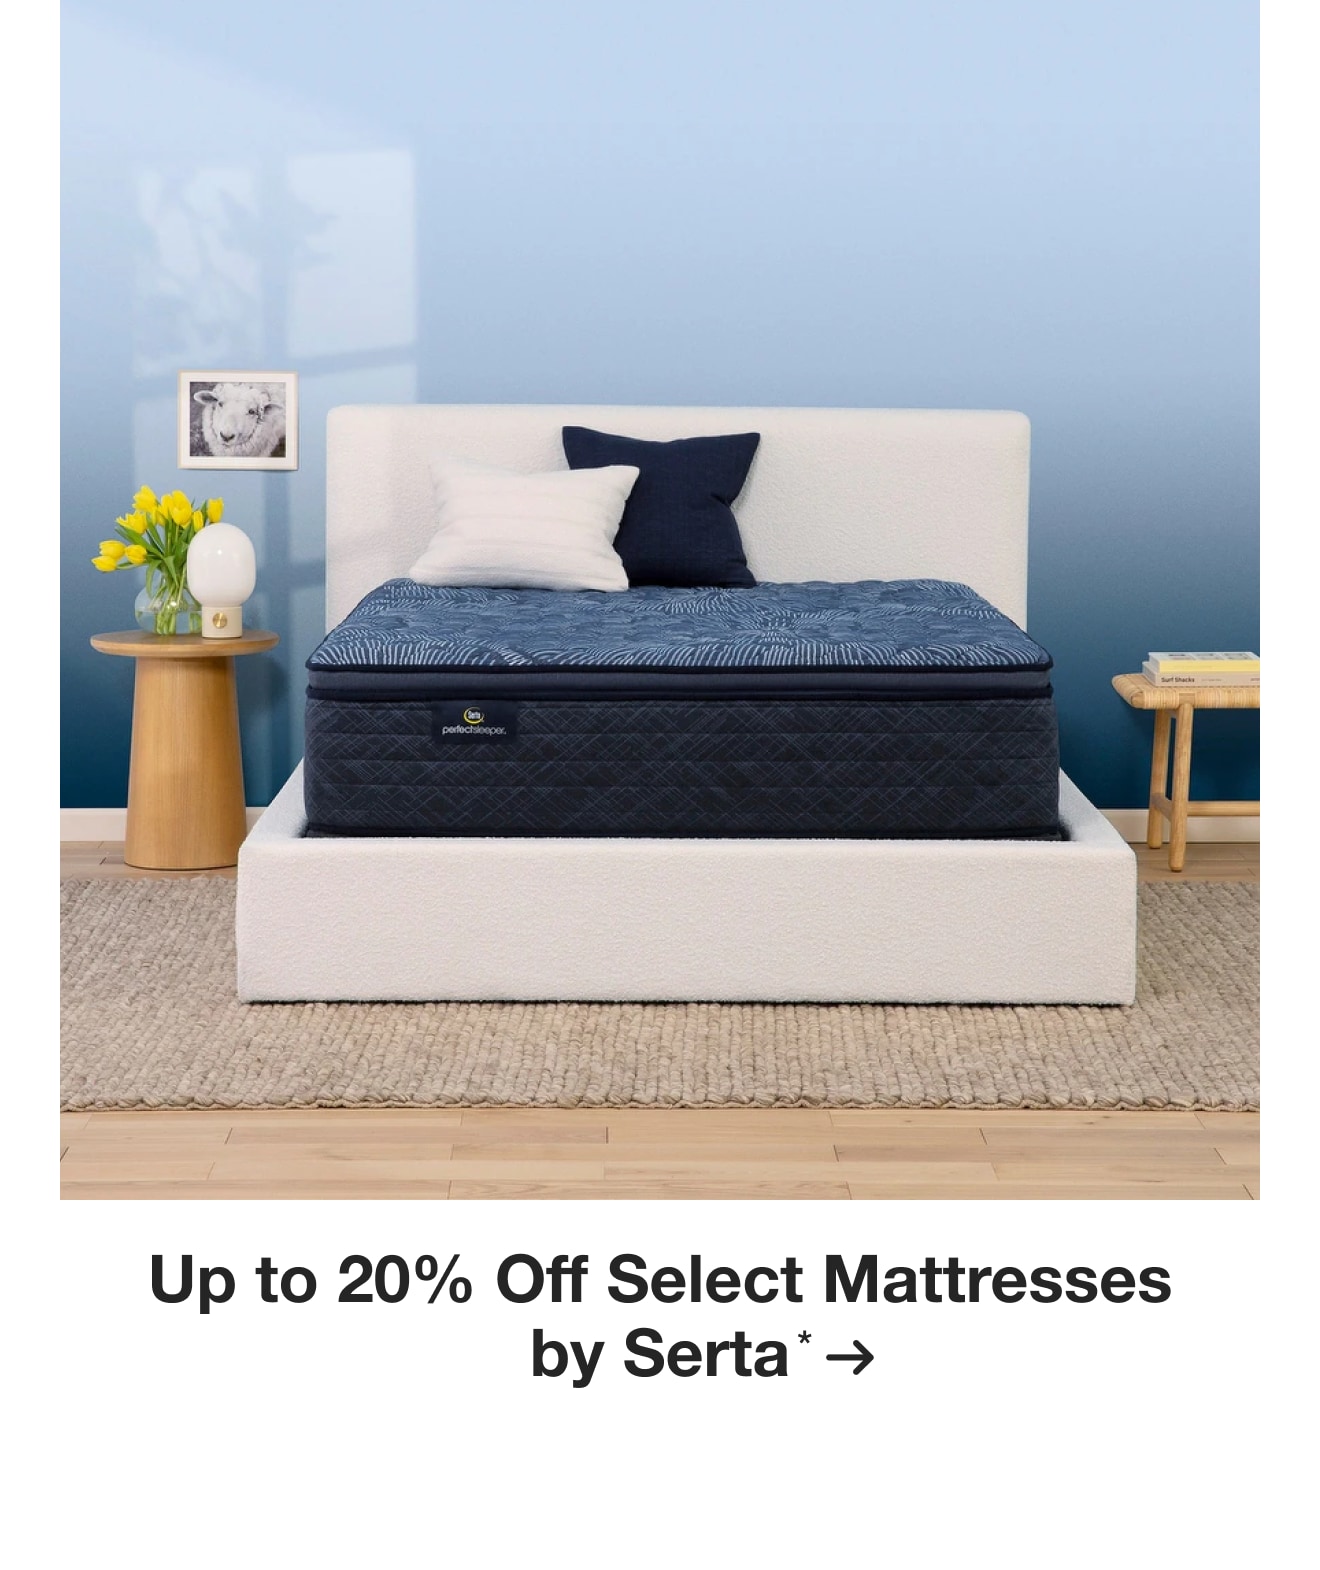 Up to 20% Off Select Mattresses by Serta*